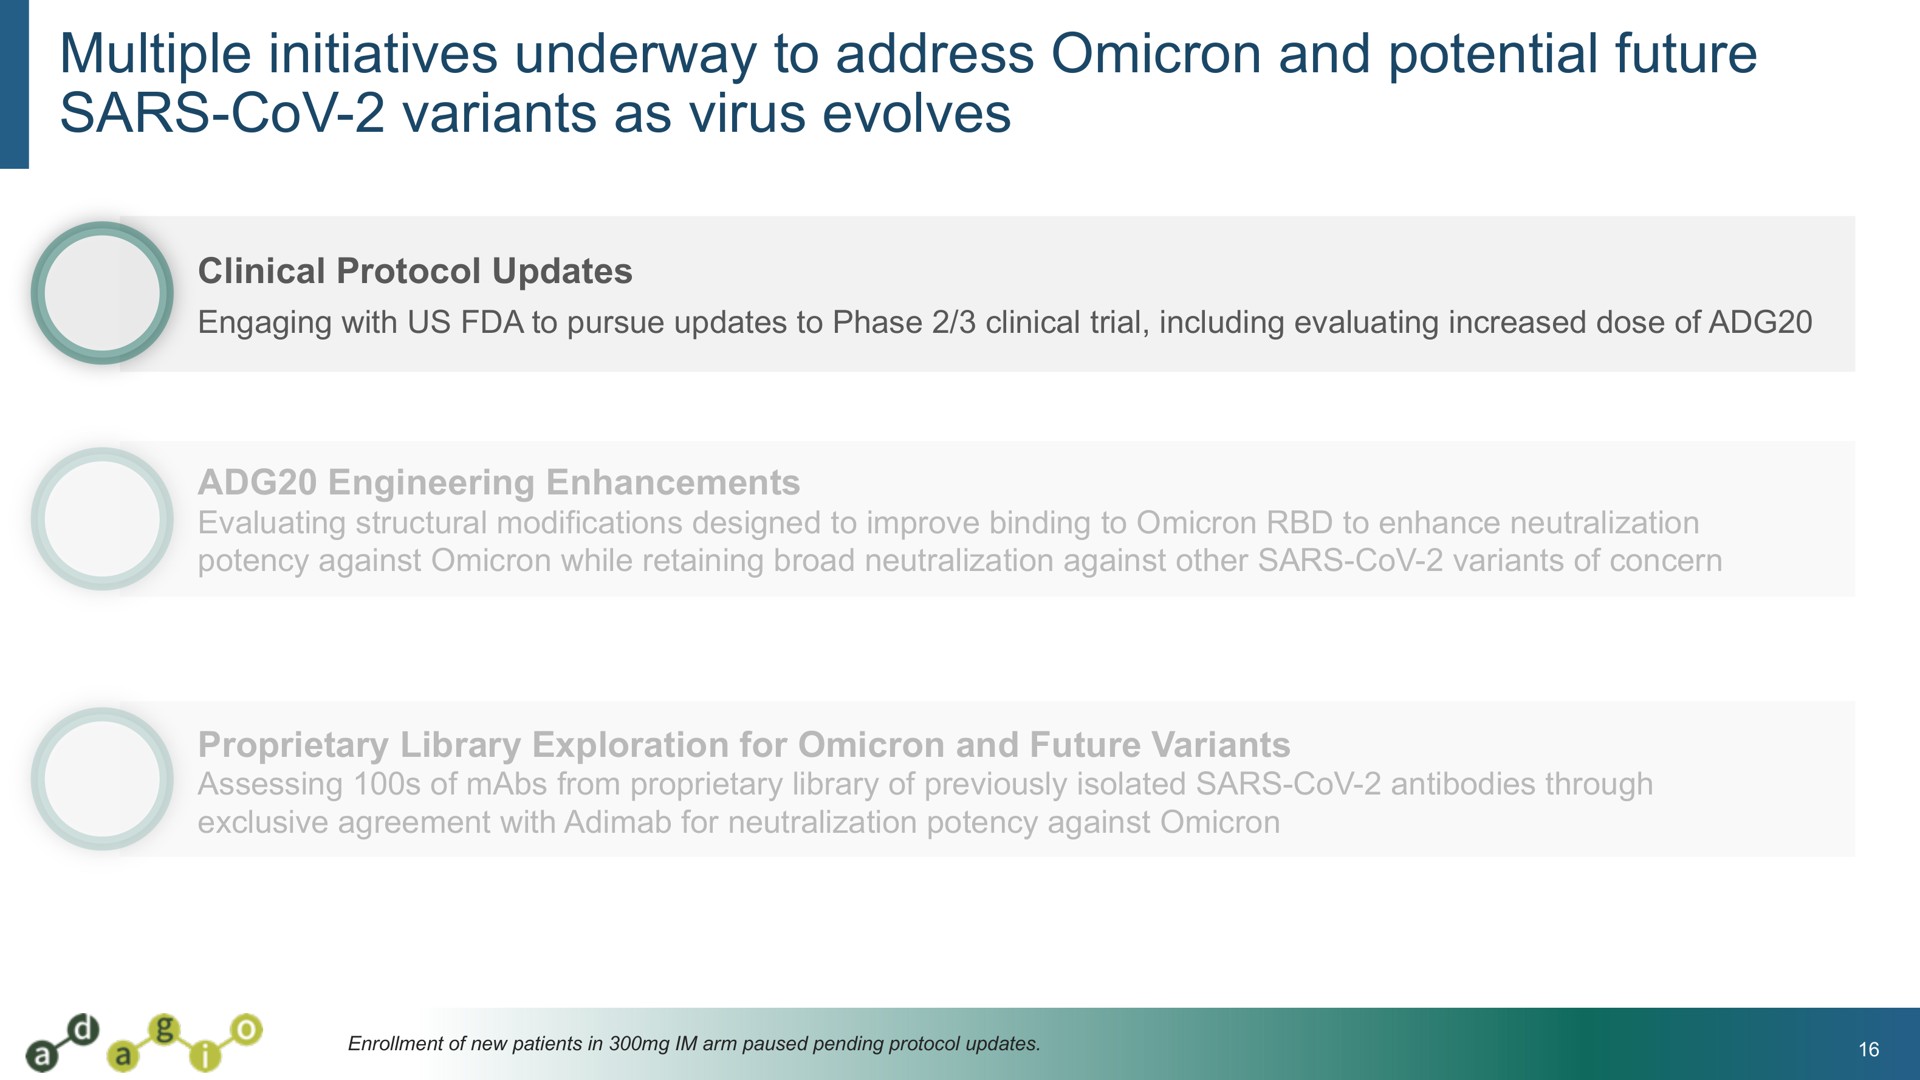 multiple initiatives underway to address omicron and potential future variants as virus evolves | Adagio Therapeutics